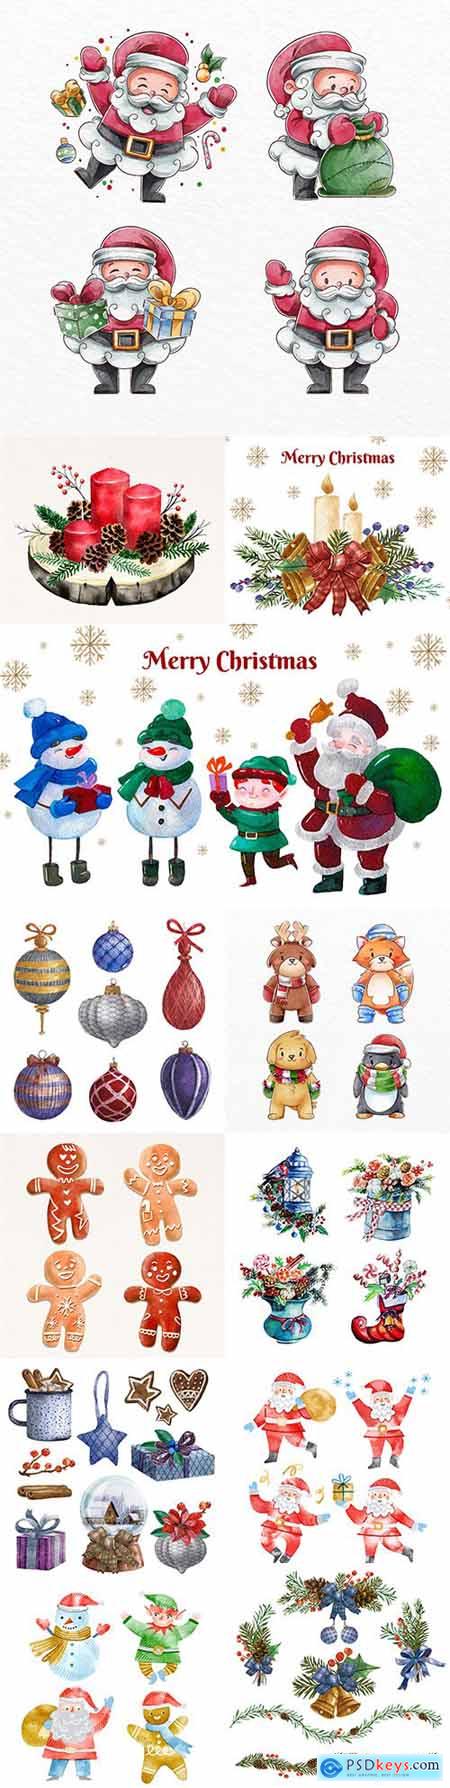 Watercolor Christmas characters and elements collection illustrations